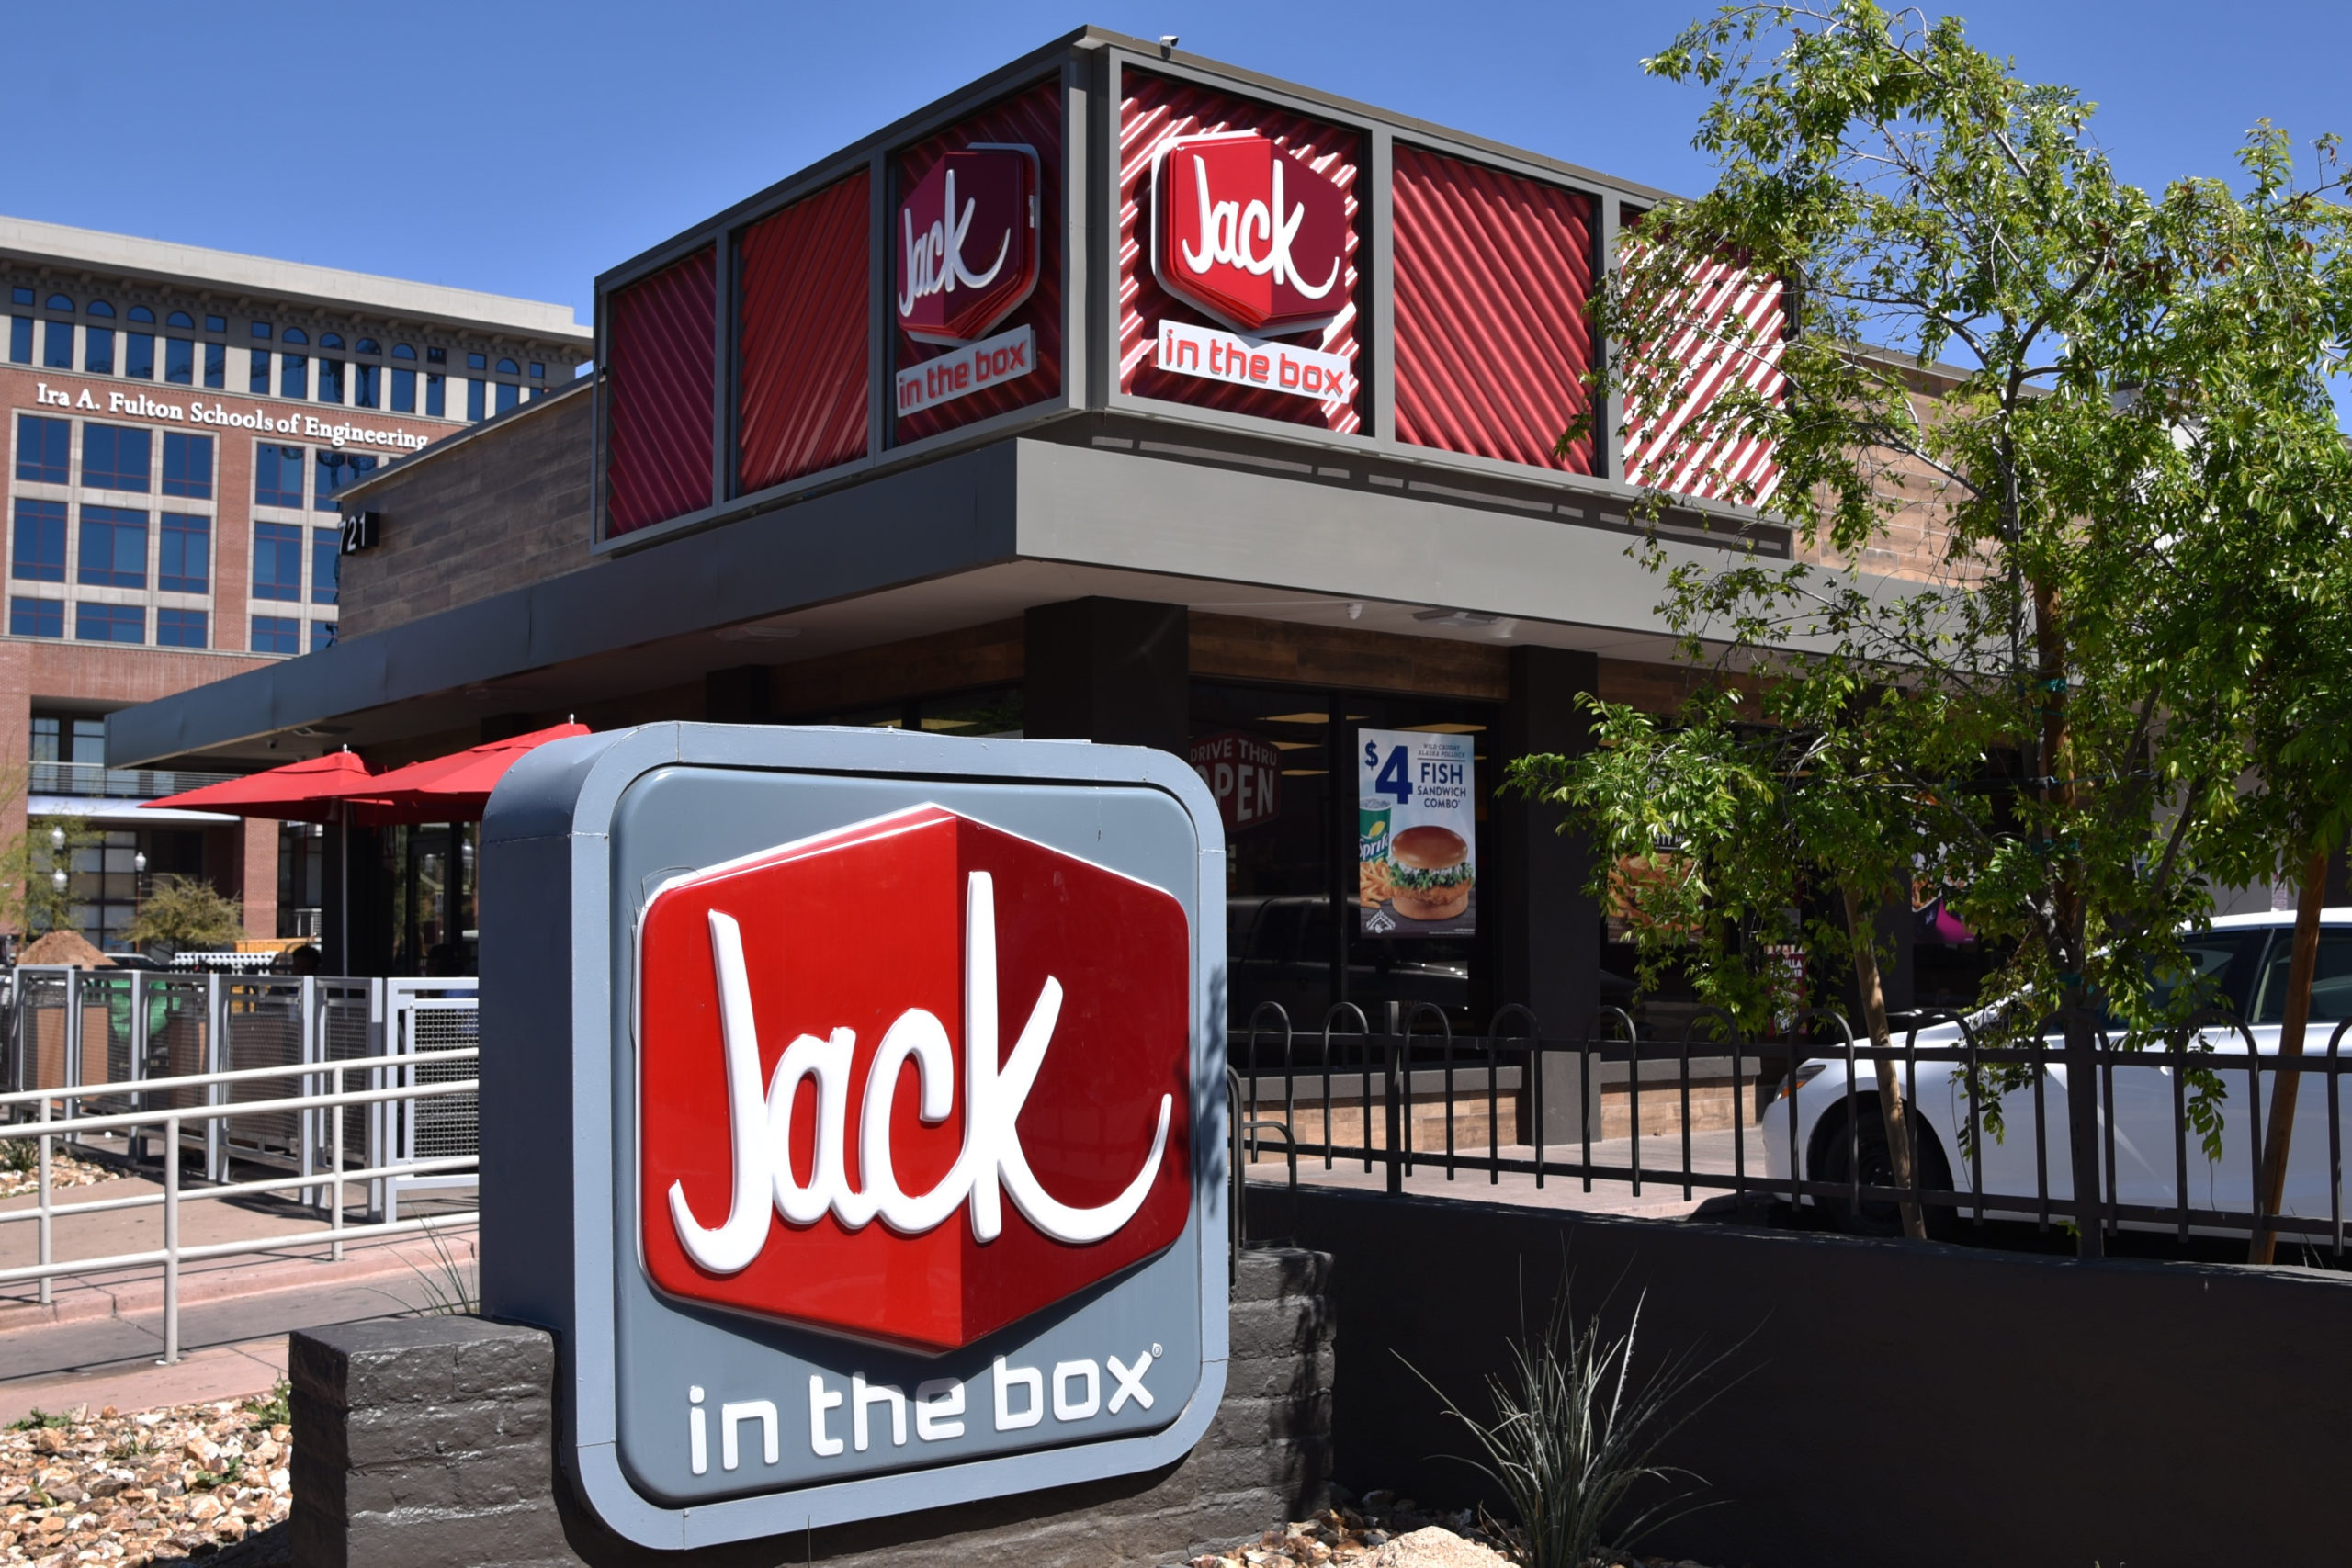 Jack in the Box on the Grow in Southeast U.S.